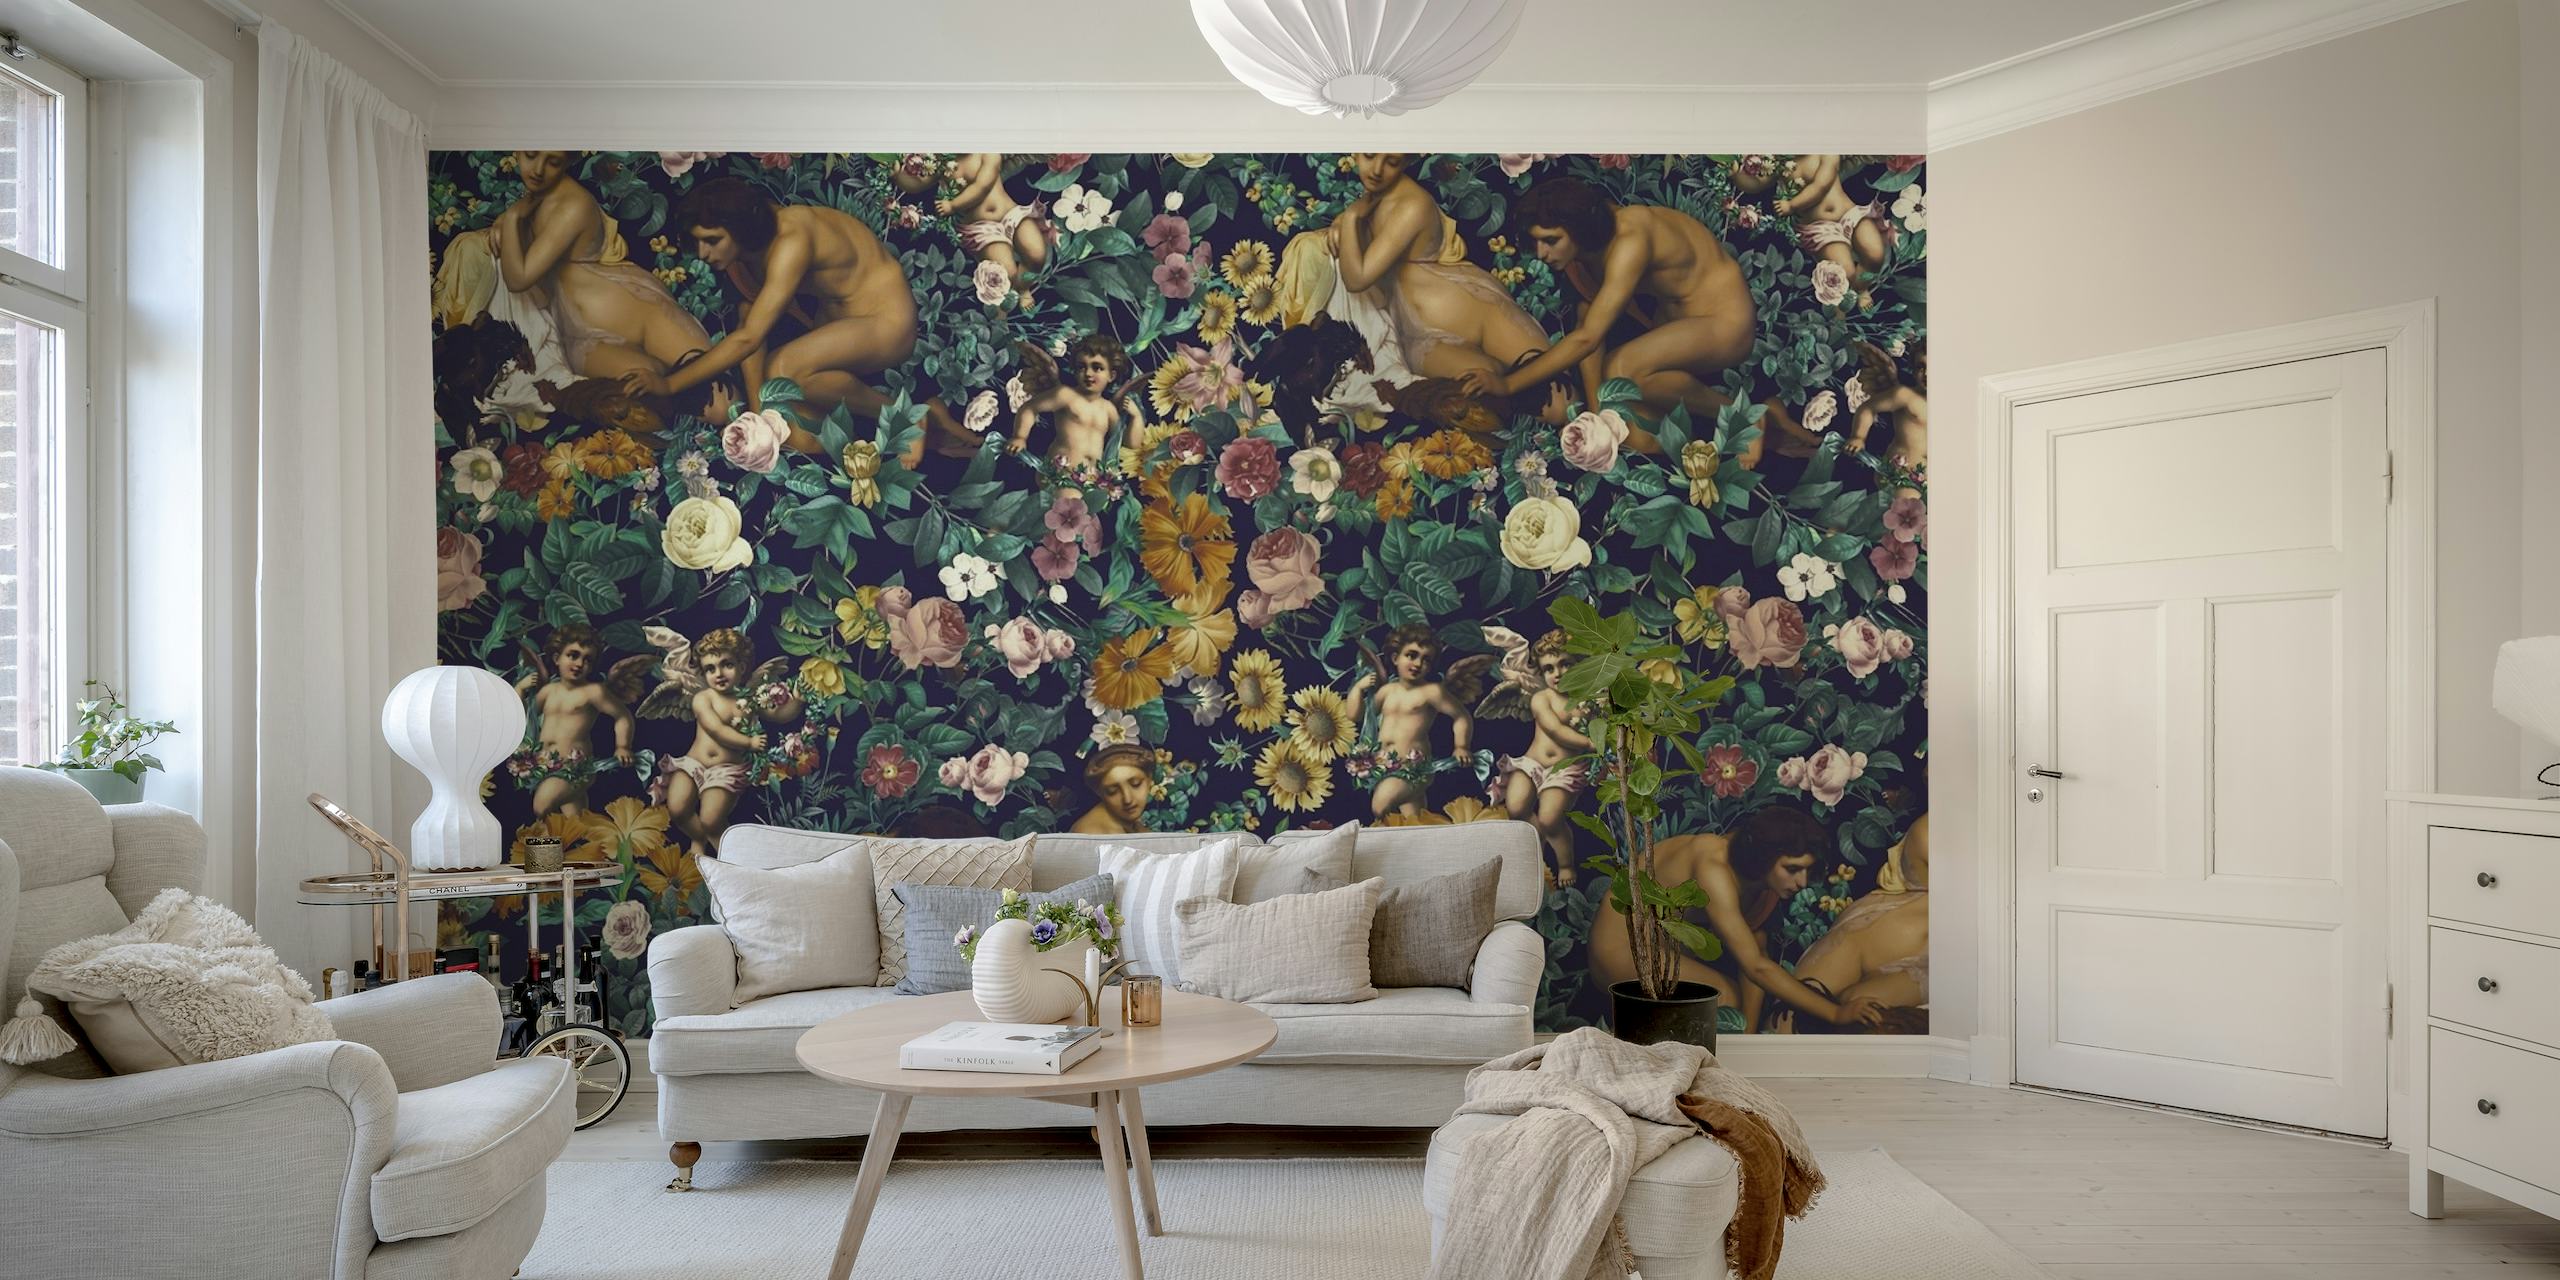 Classical Grecian figures amidst a lush floral pattern wall mural